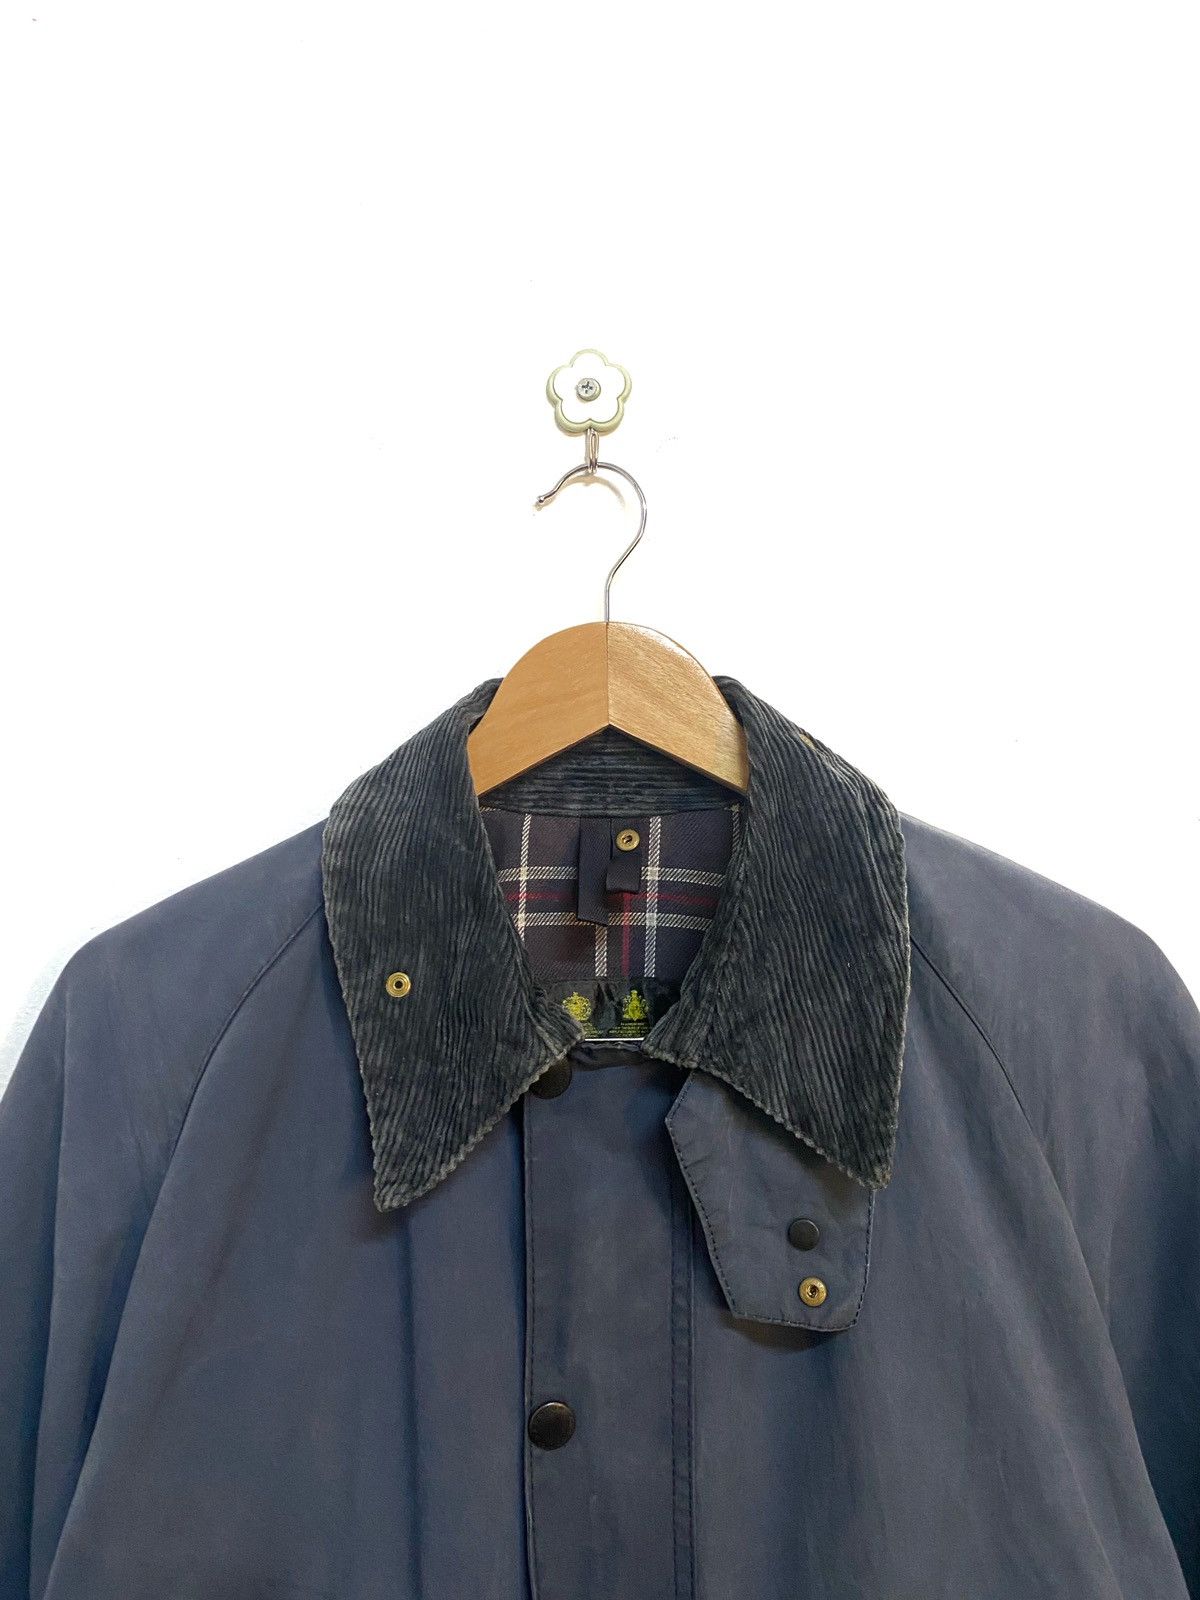 Barbour Classic Bedale A100 Wax Jacket Made in England - 2